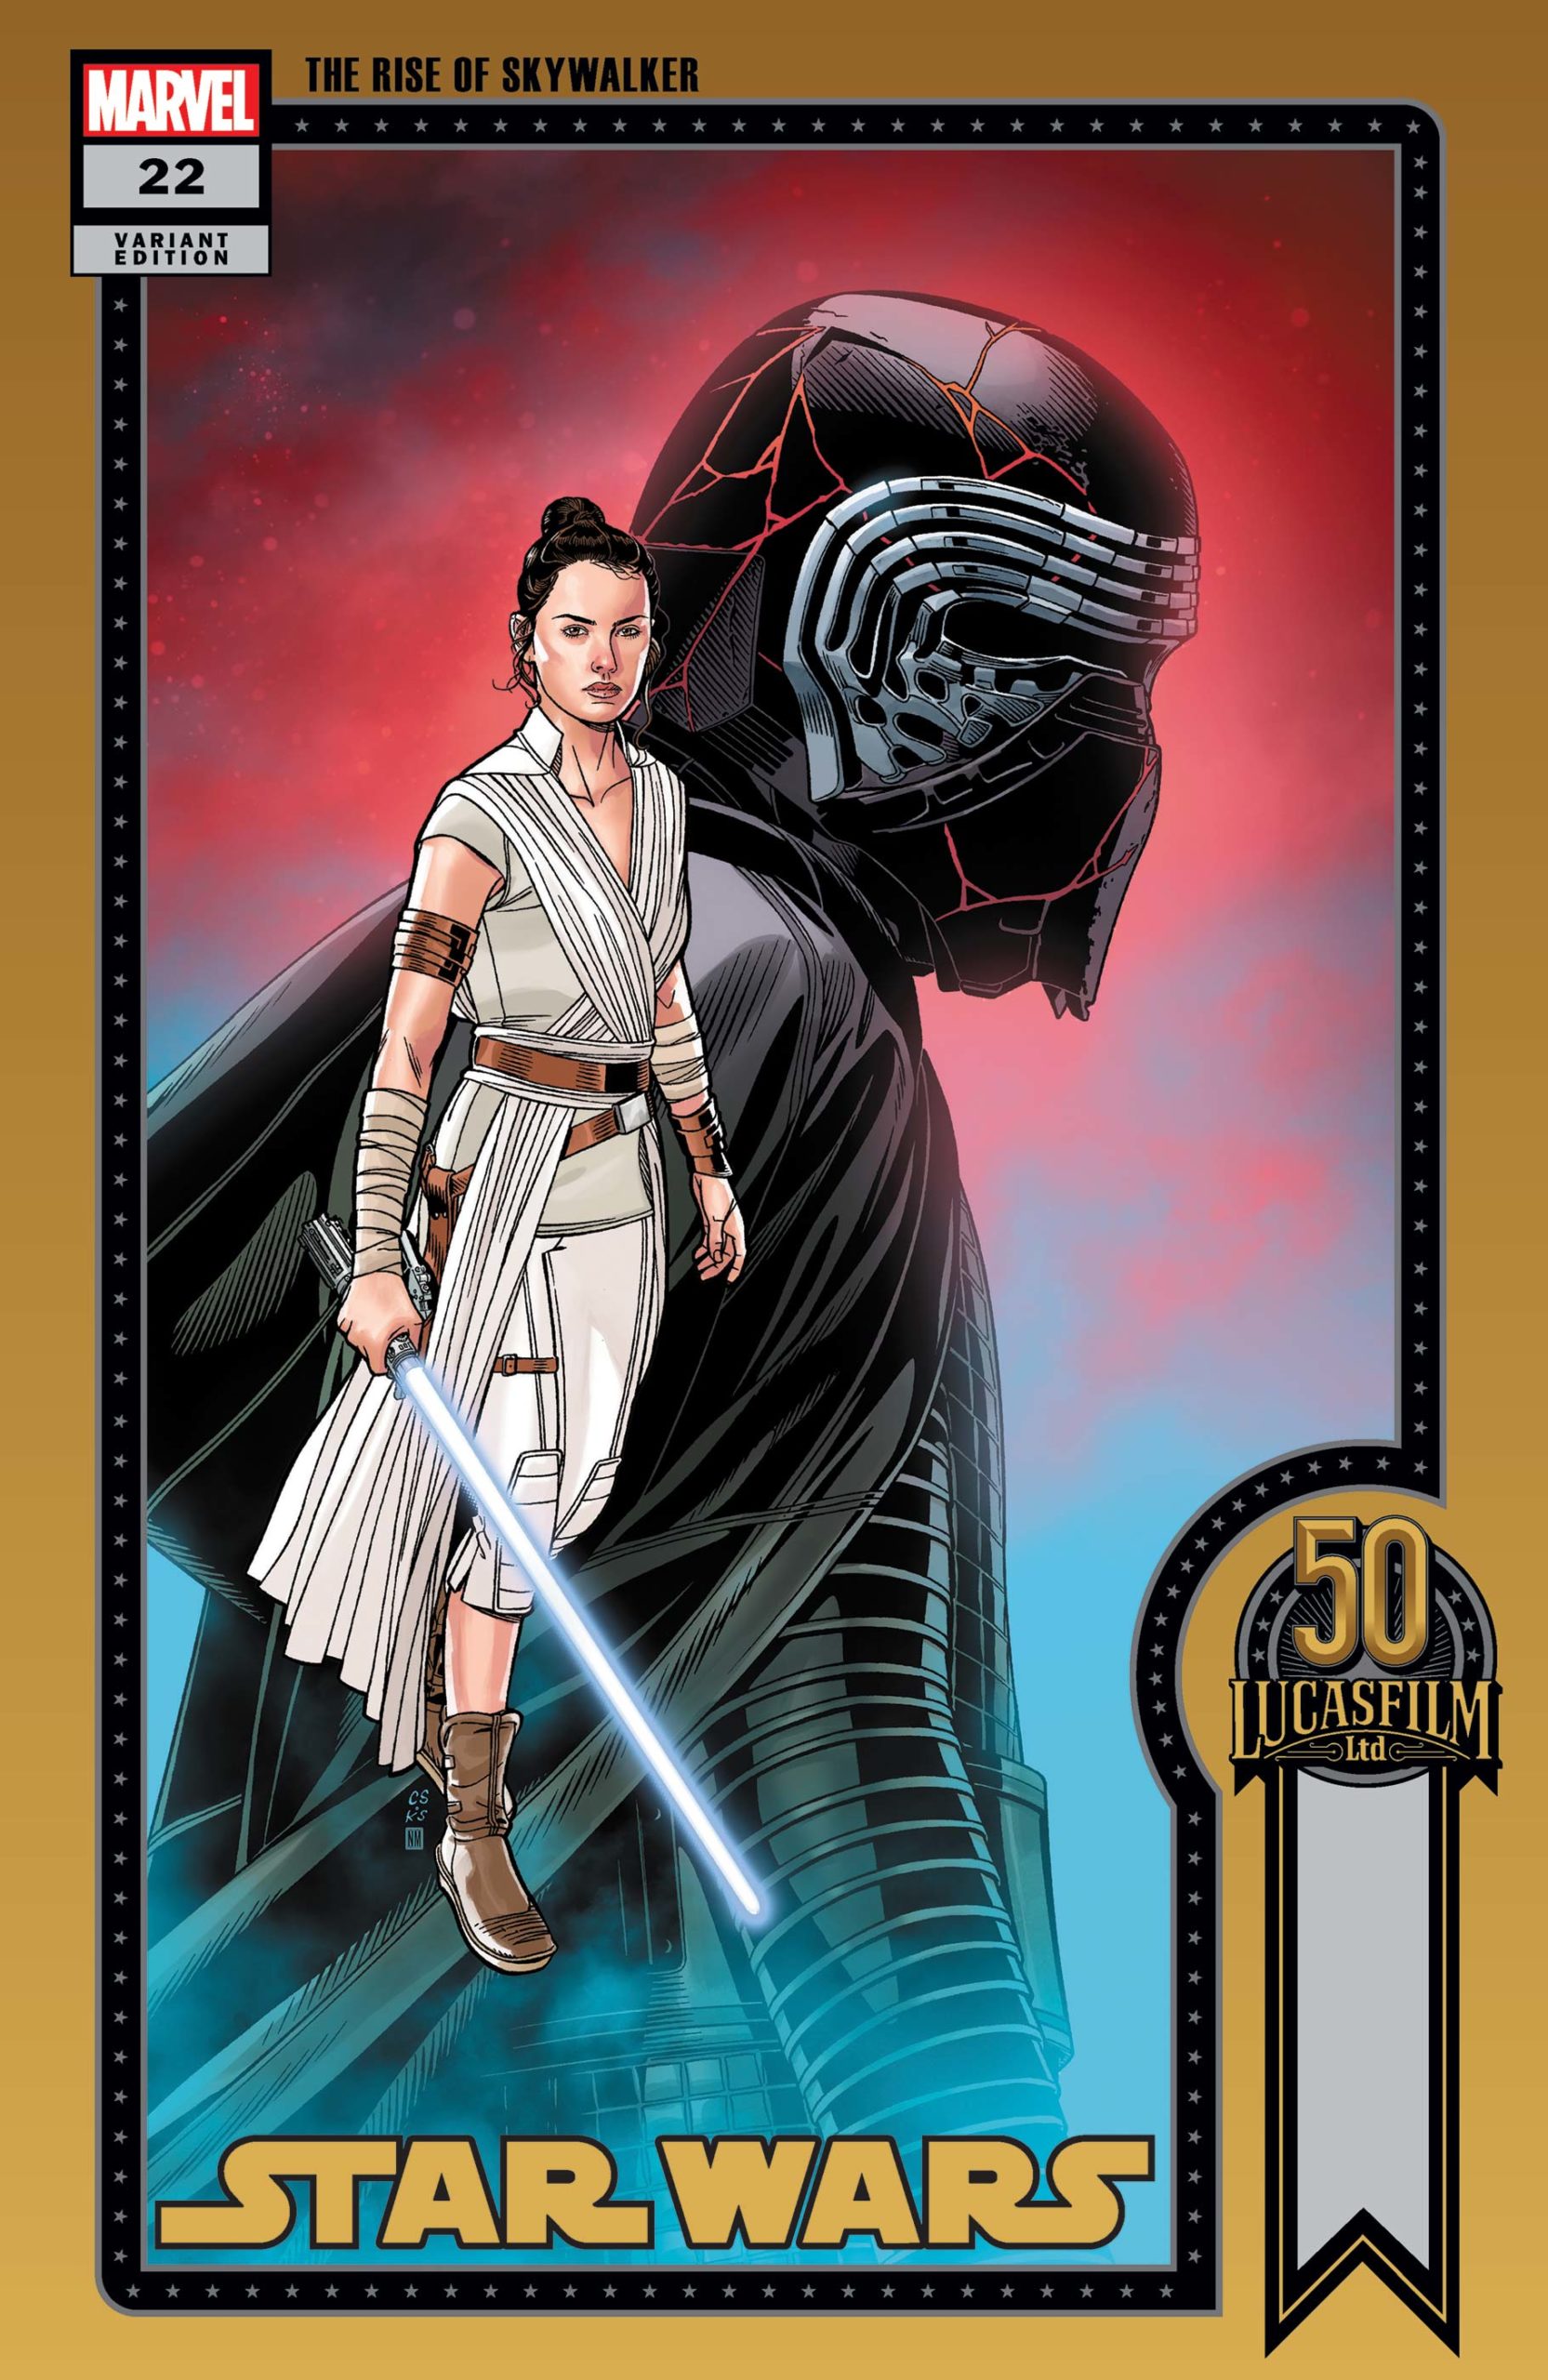 Star Wars #22 (Chris Sprouse Lucasfilm 50th Anniversary Variant Cover) (30.03.2022)